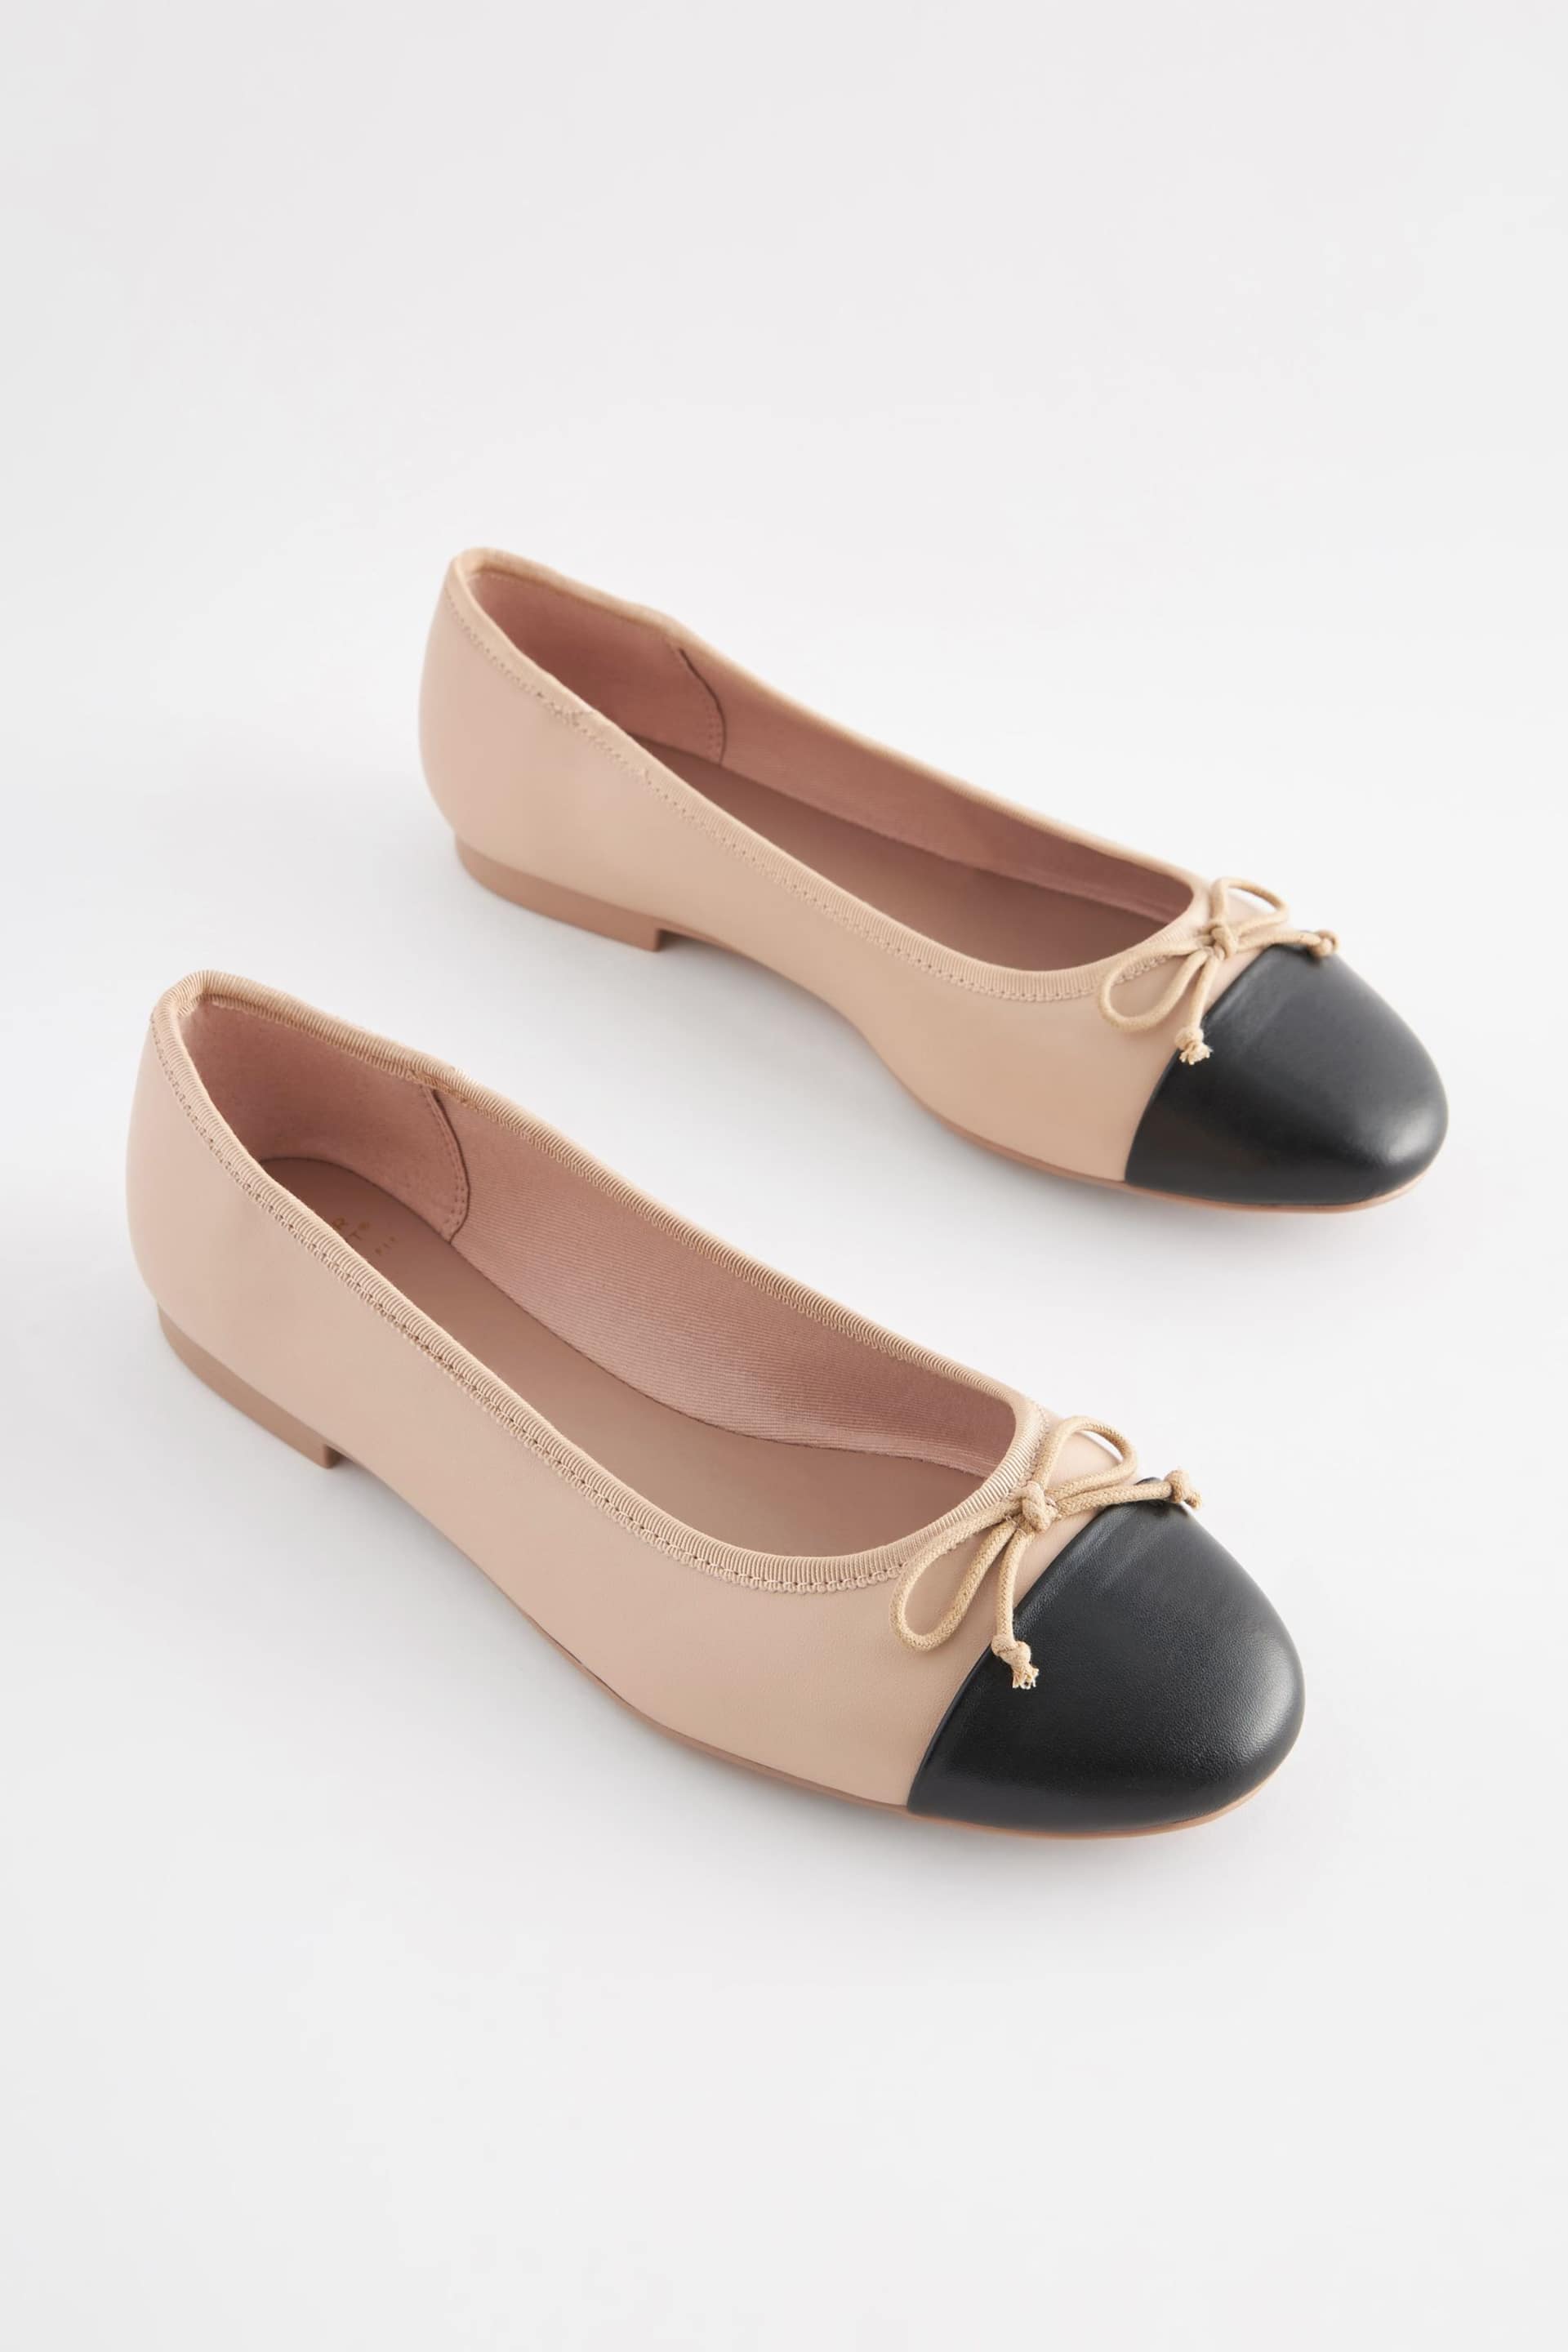 Nude Cream/Black Toe Cap Extra Wide Fit Forever Comfort® Ballerinas Shoes - Image 3 of 7